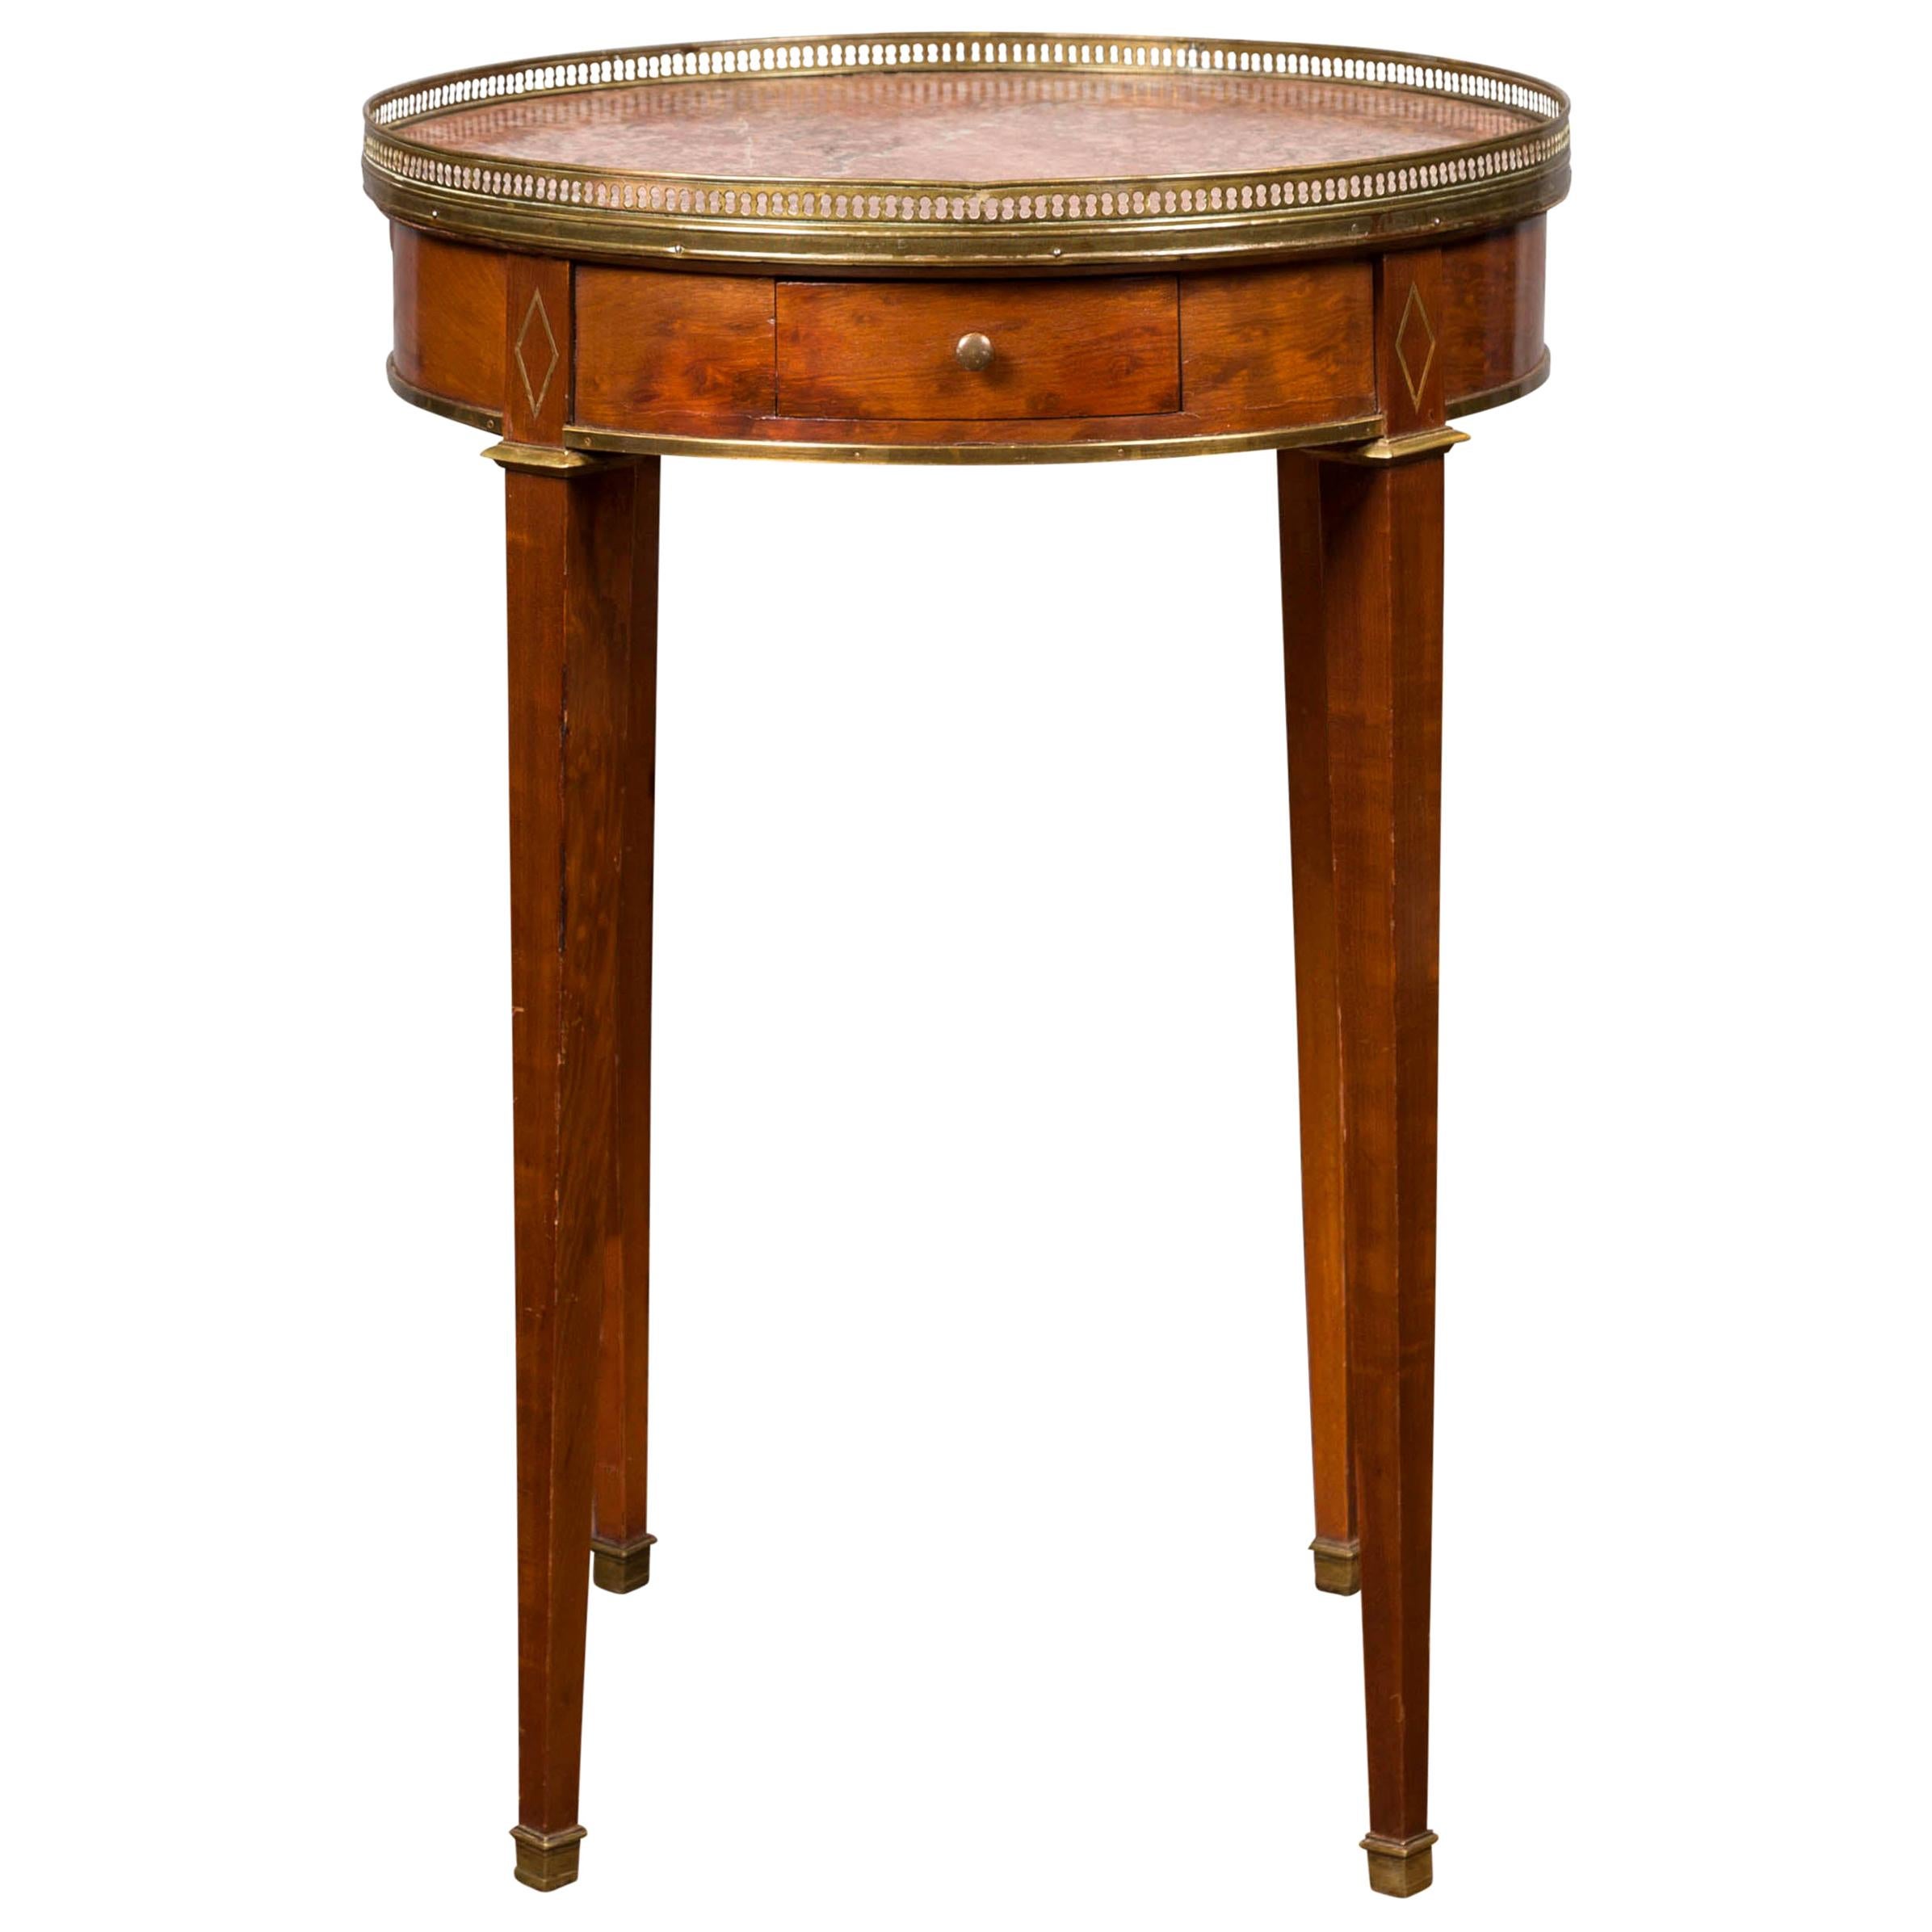 French 1870s Empire Style Round Table with Marble Top, Brass Gallery and Drawer